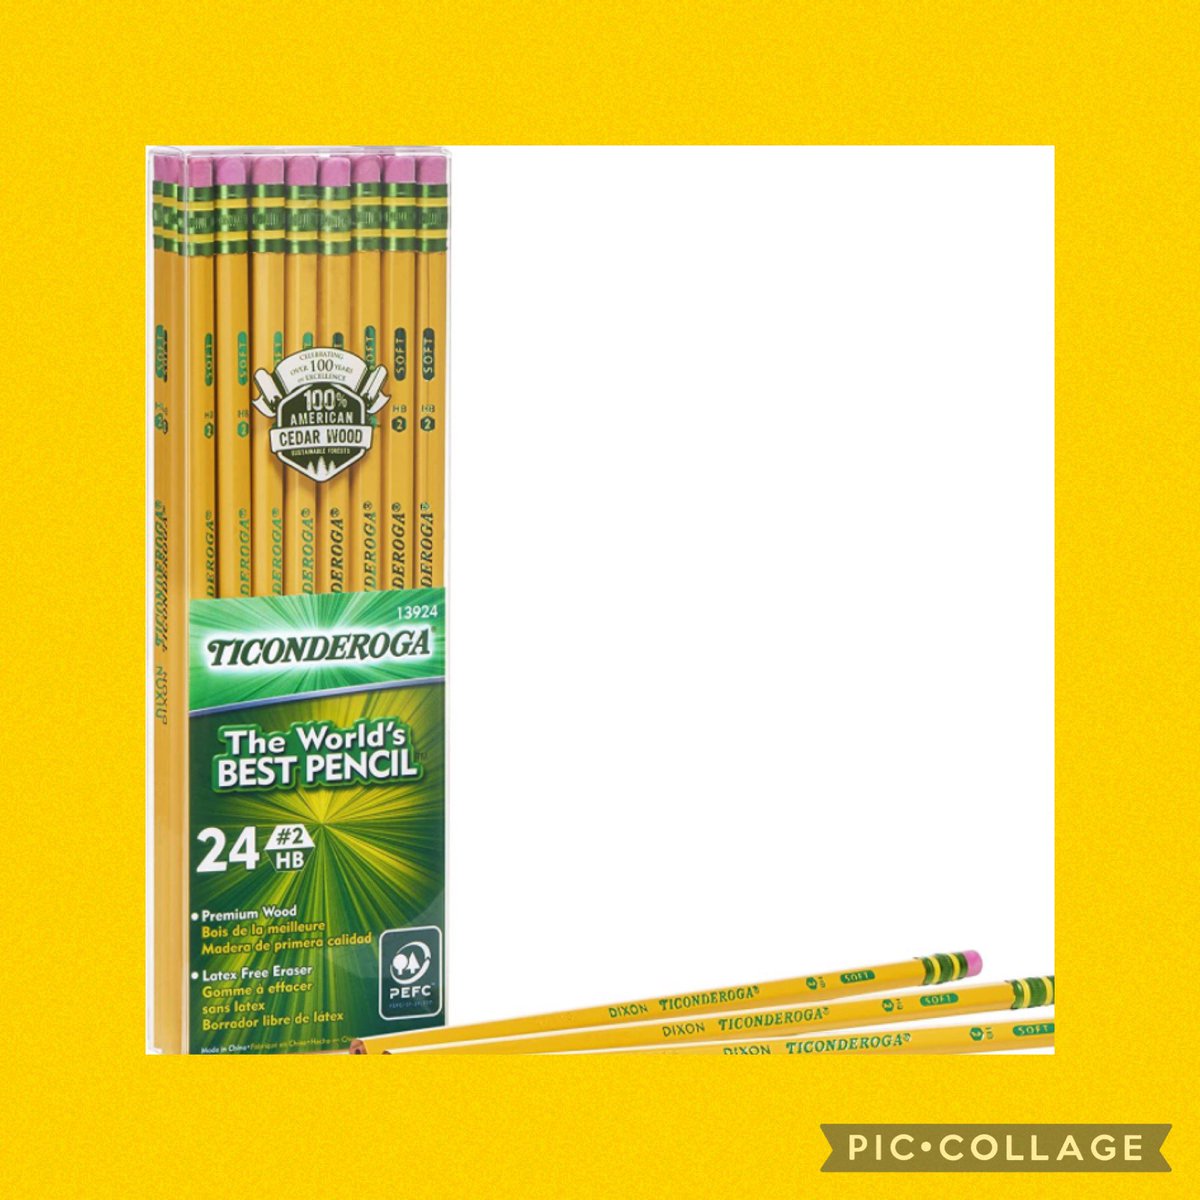 Sunday #clearthelist goal is pencils! Pencils are essential in the classroom and we go through so many in a school year! #PostForPencils #clearthelist2023 #clearthelists #SpecialEducation #adoptaclassroom #SupportAClassroom 

amzn.to/3joJ3w7